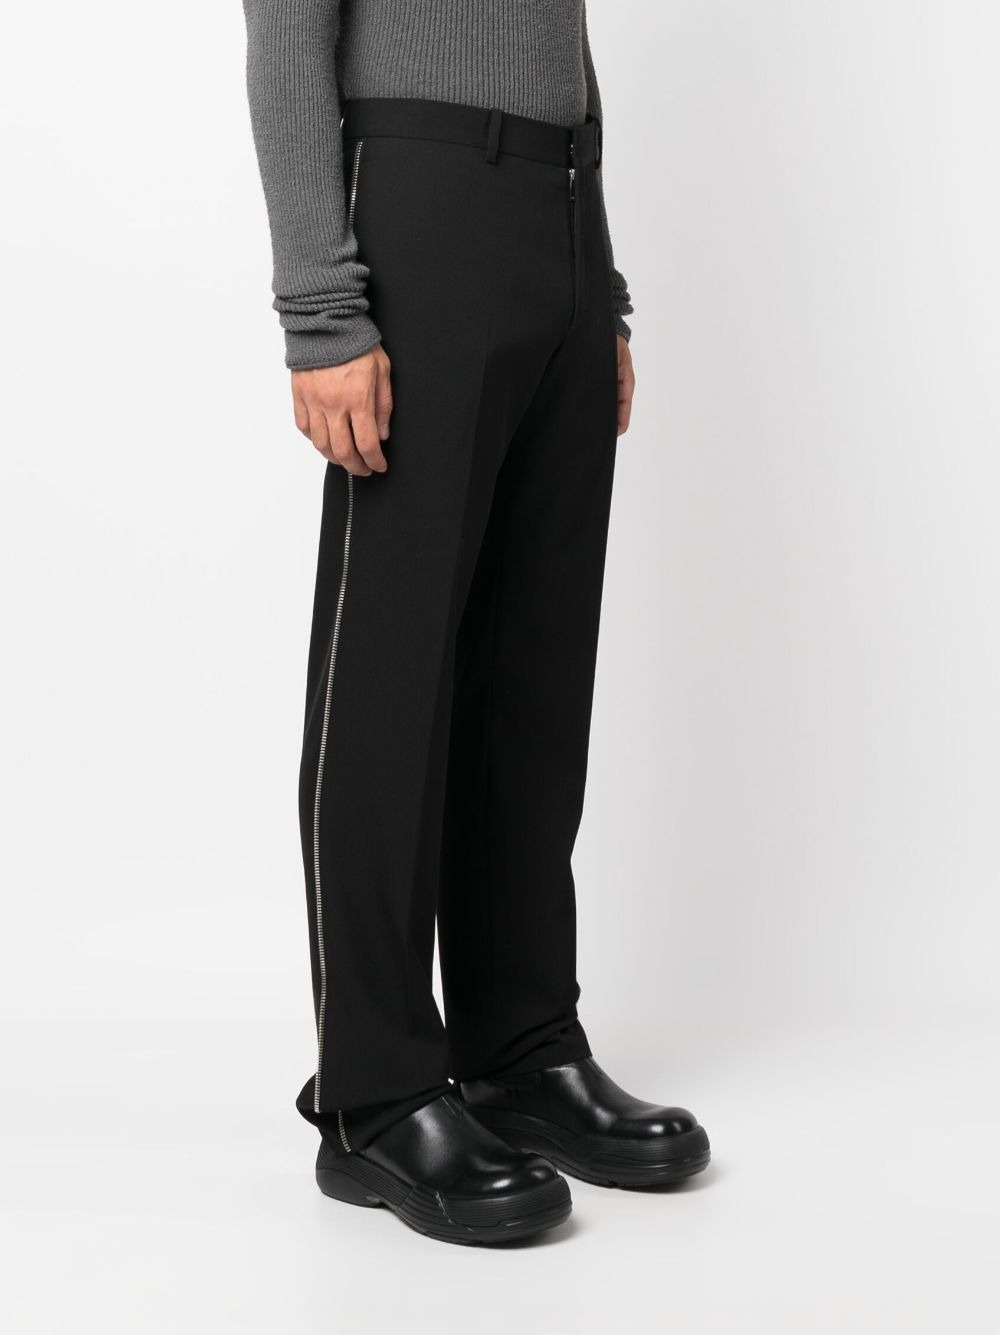 Buy Black Embroidered Straight Pants Online - W for Woman